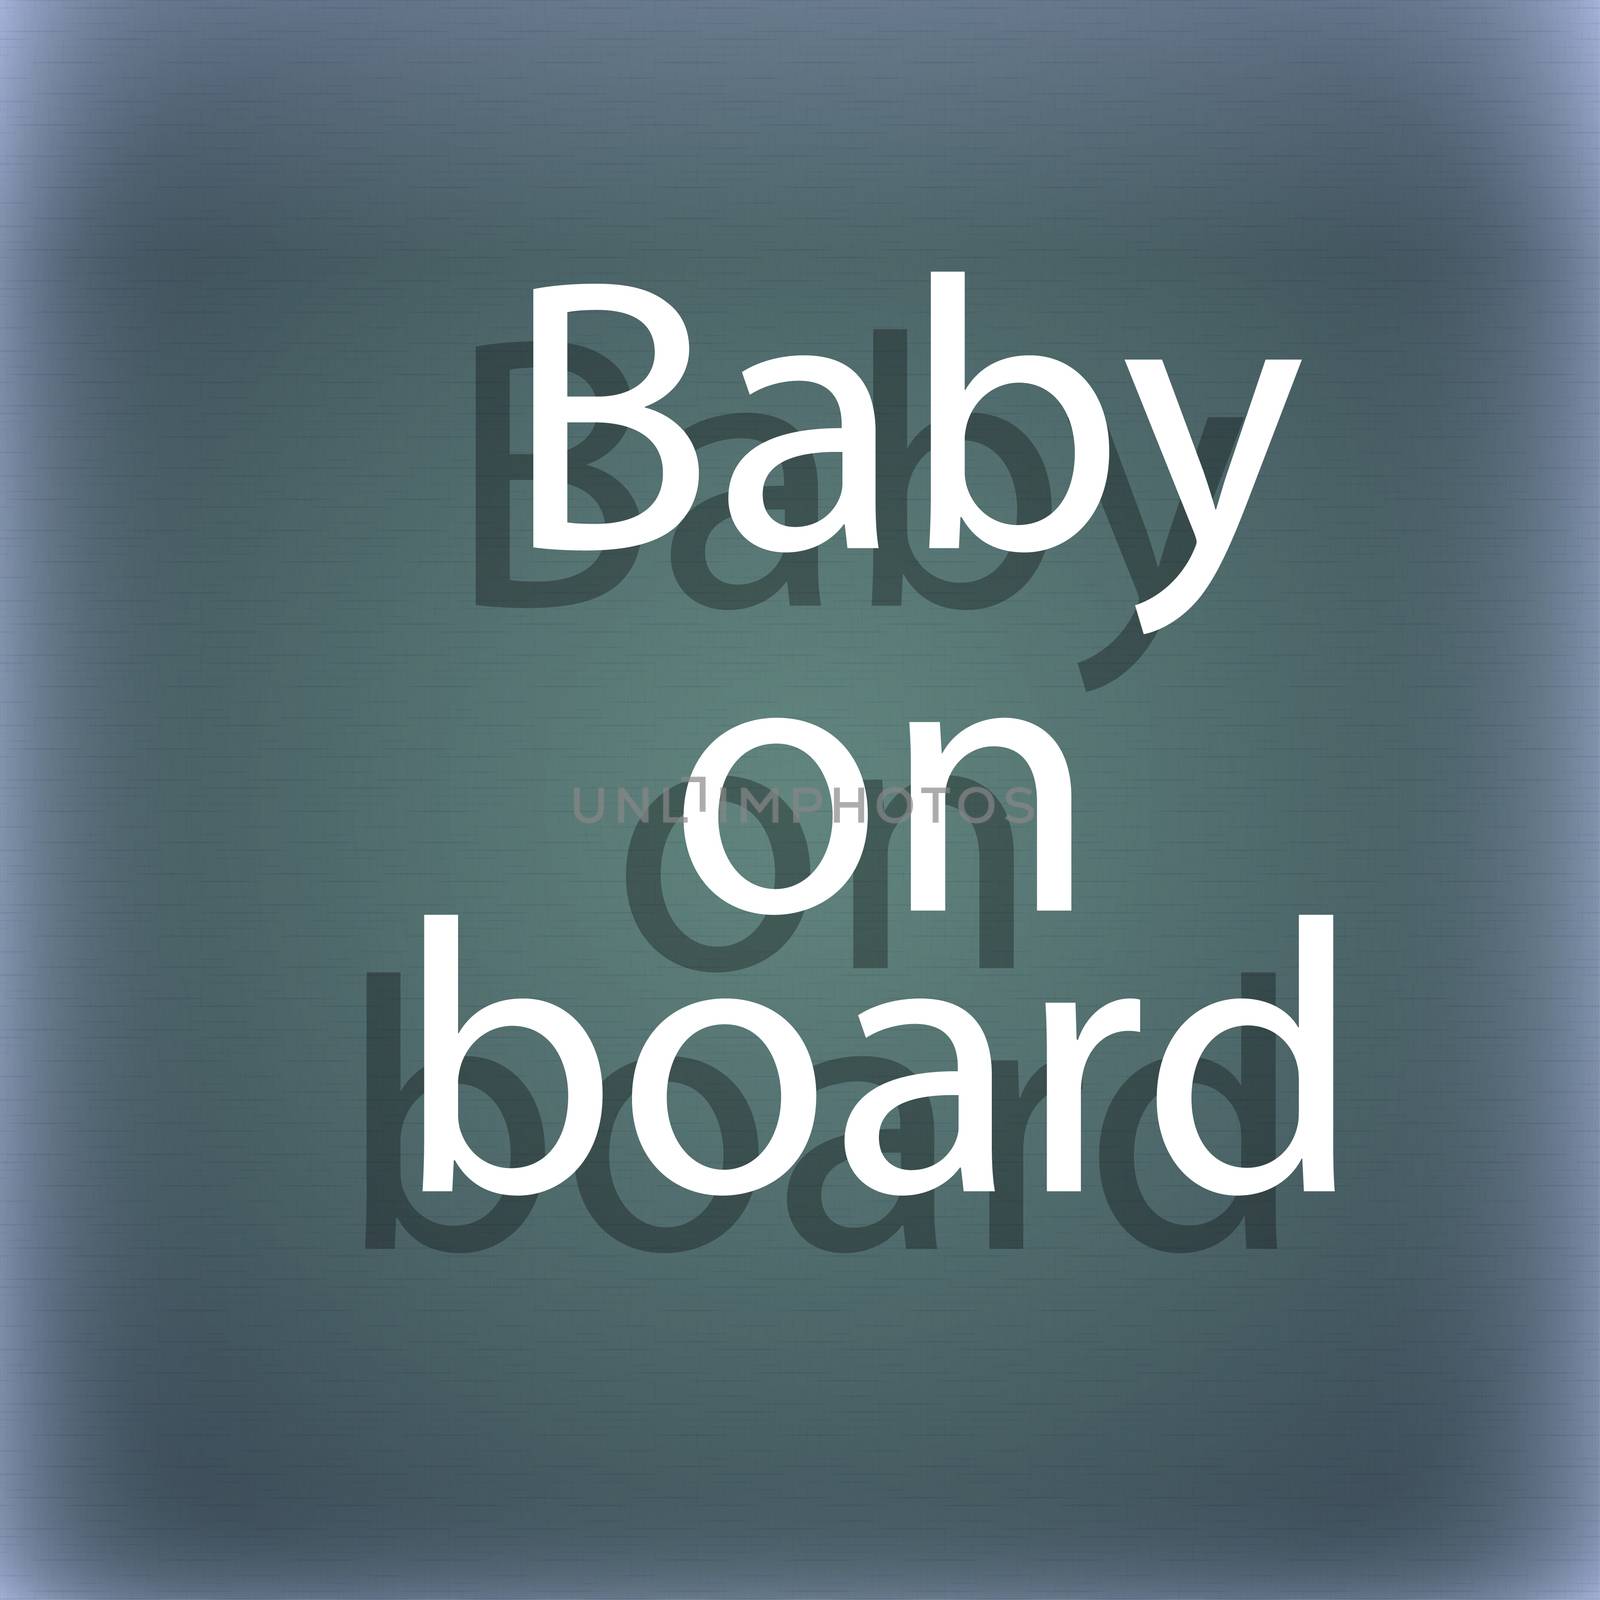 Baby on board sign icon. Infant in car caution symbol. On the blue-green abstract background with shadow and space for your text.  by serhii_lohvyniuk